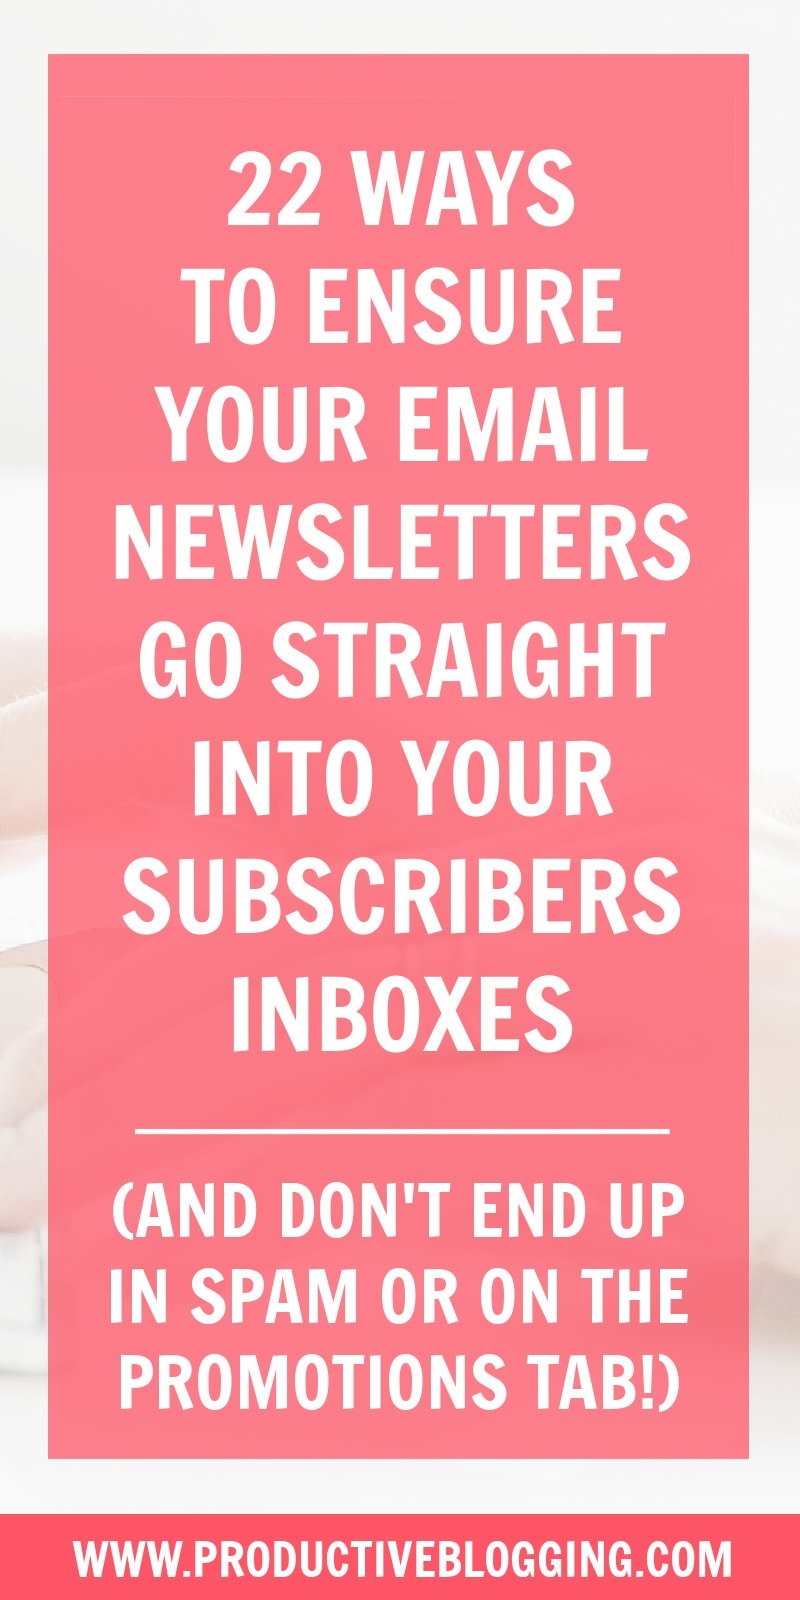 Do your email newsletters often end up in the spam folder? Here's how to improve your email deliverability so more of your emails end up in inboxes! #emailmarketing #emaildeliverability #convertkit #emaillist #emaillistgrowth #growyouremaillist #emailmarketingtips #listbuilding #subscribers #blogging #bloggers #bloggingtips #growyourblog #bloggrowth #productivity #productivitytips #productiveblogging #blogsmarternotharder